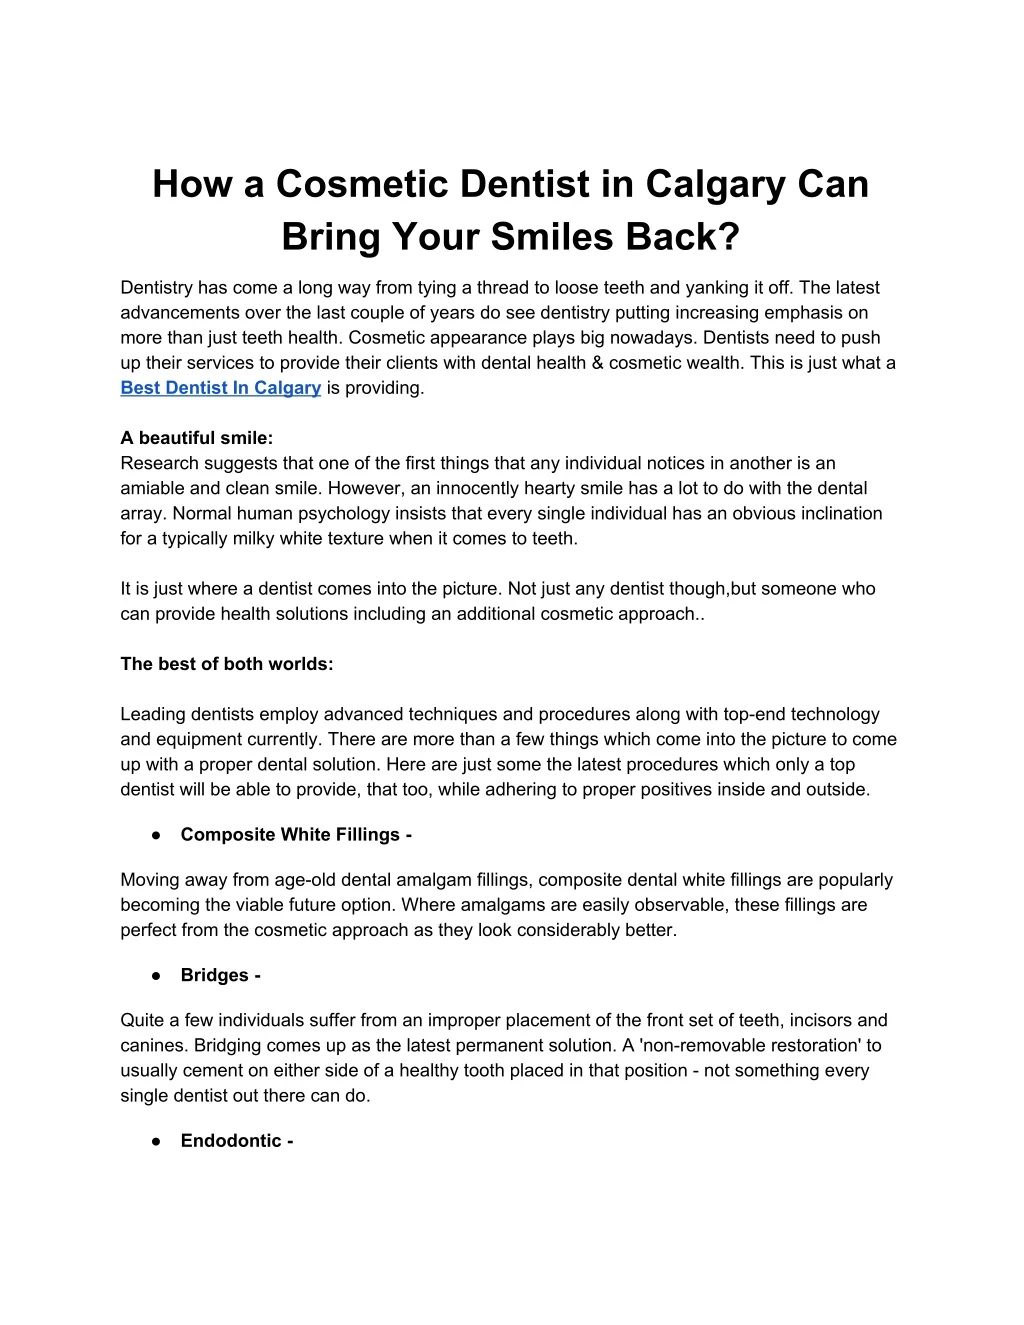 how a cosmetic dentist in calgary can bring your